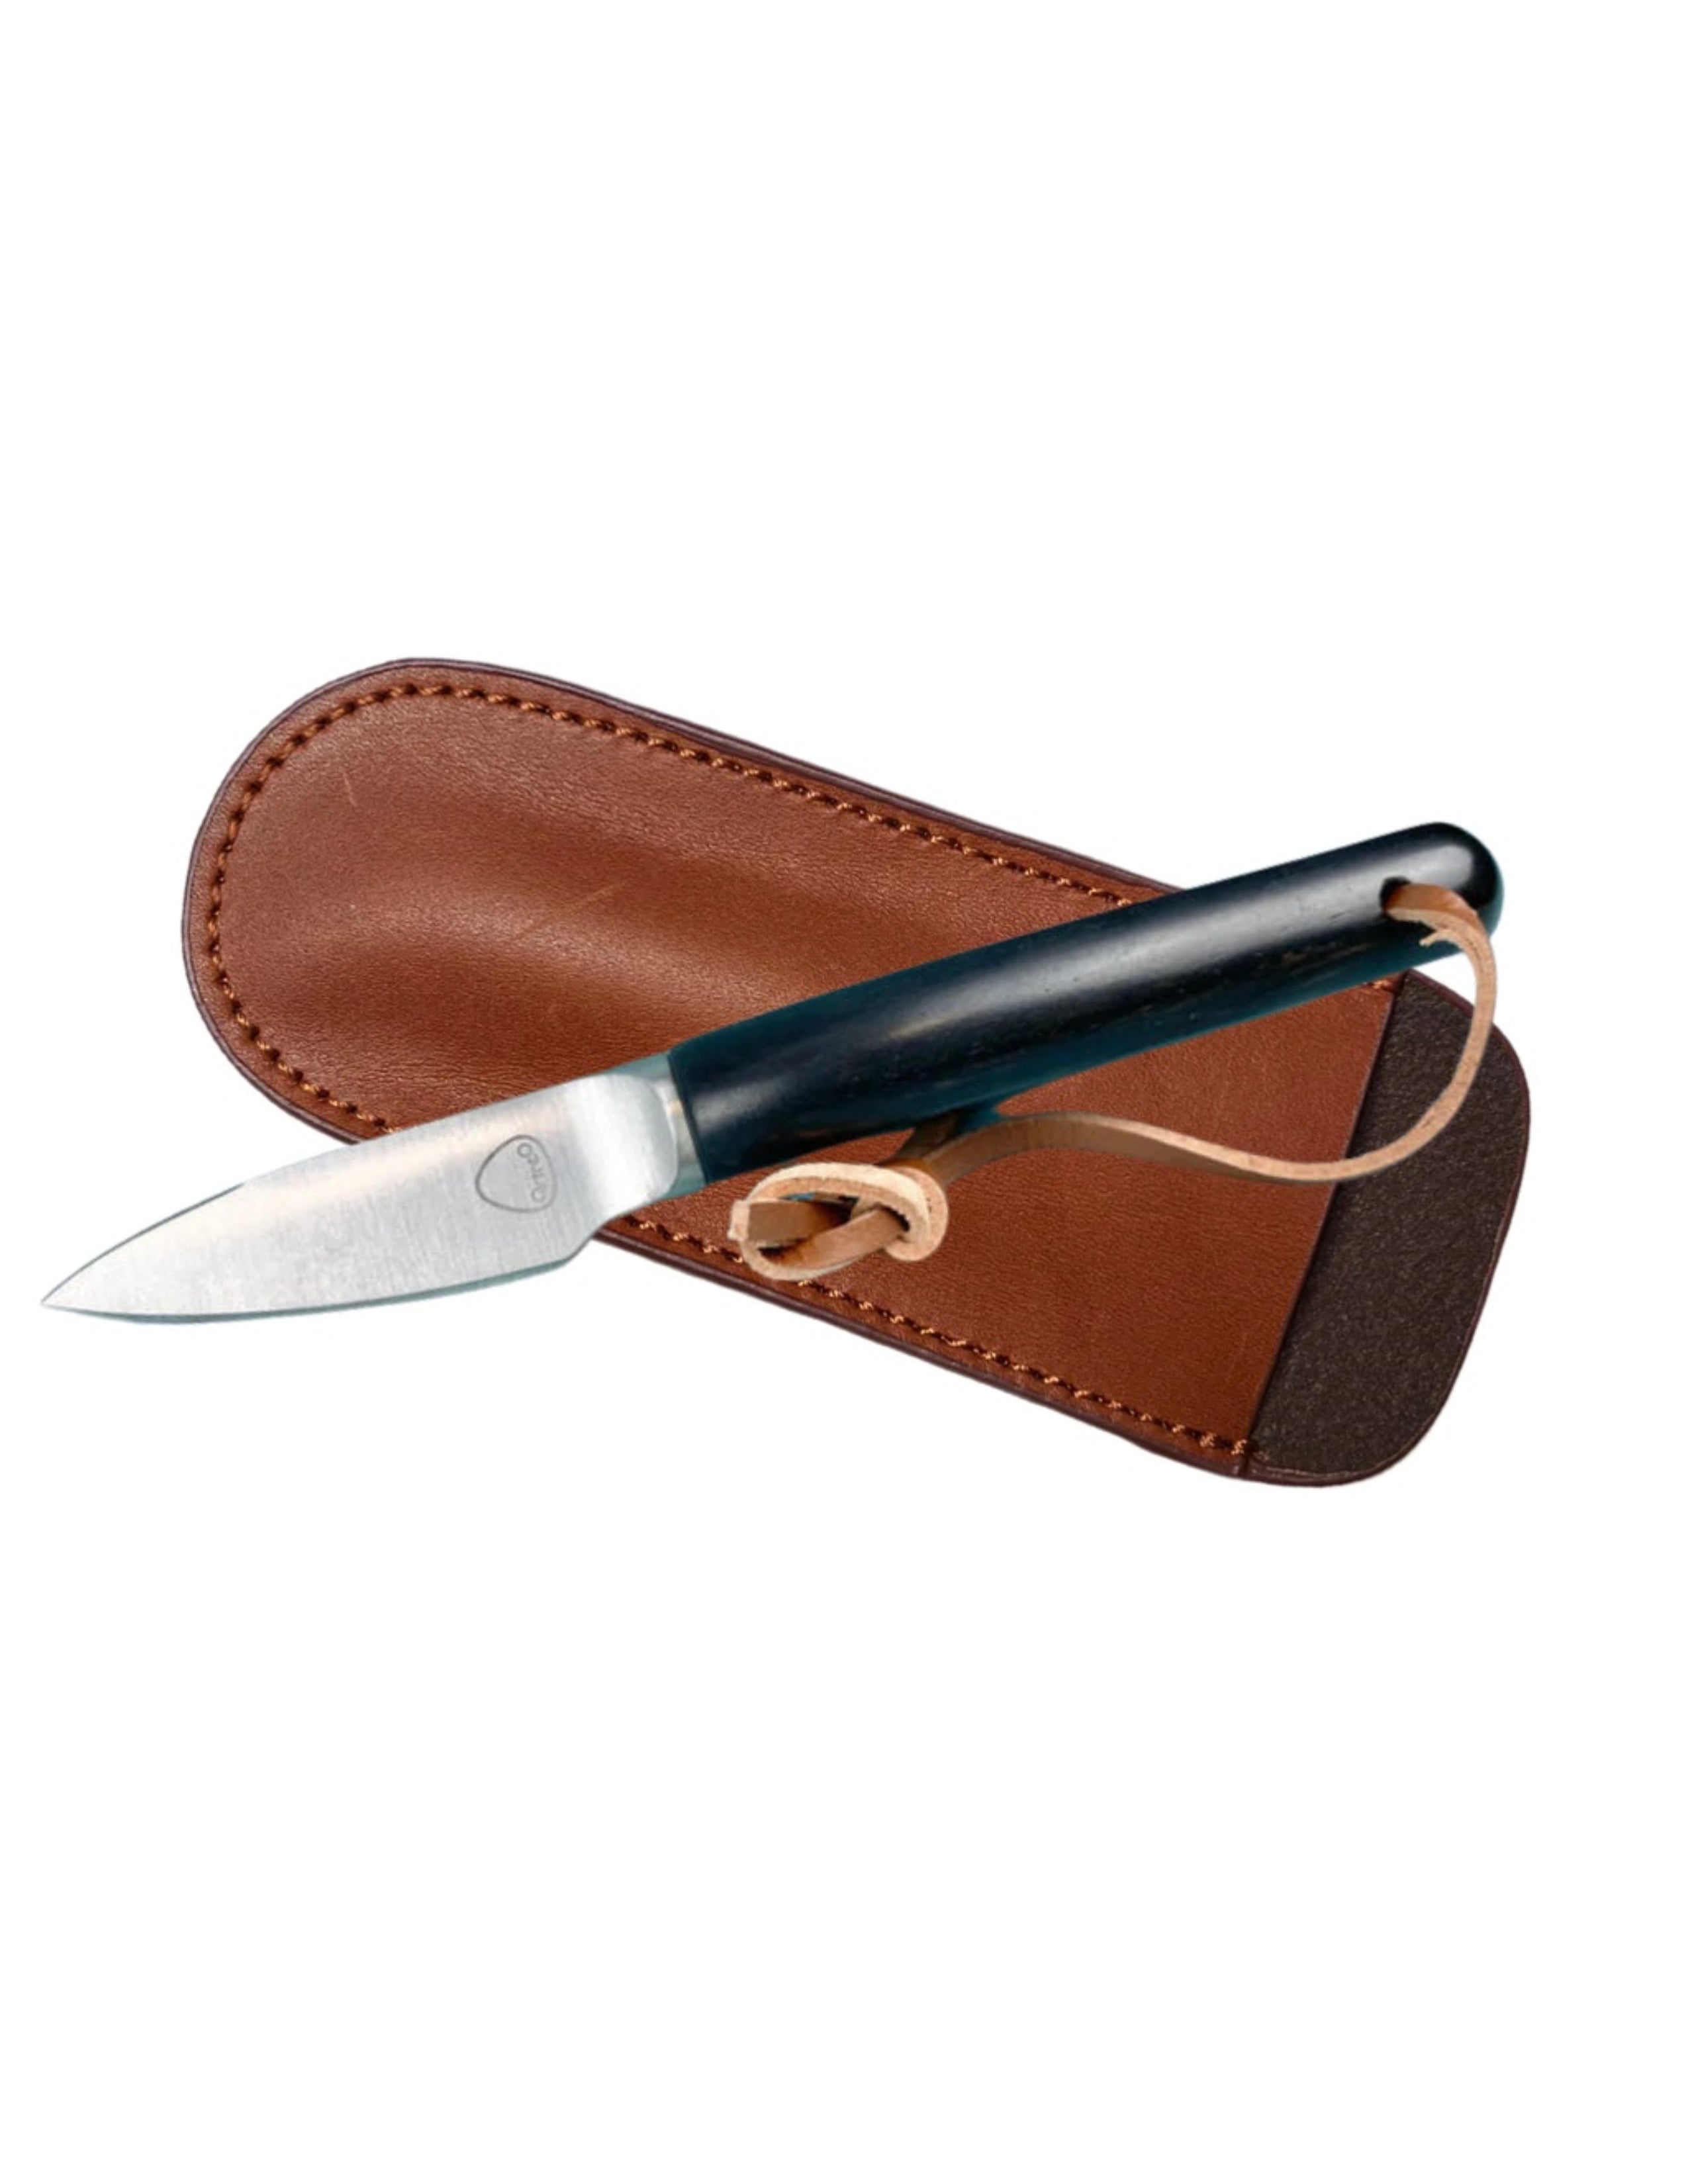 Ecallier Oyster Knife in Leather Pouch - Wenge